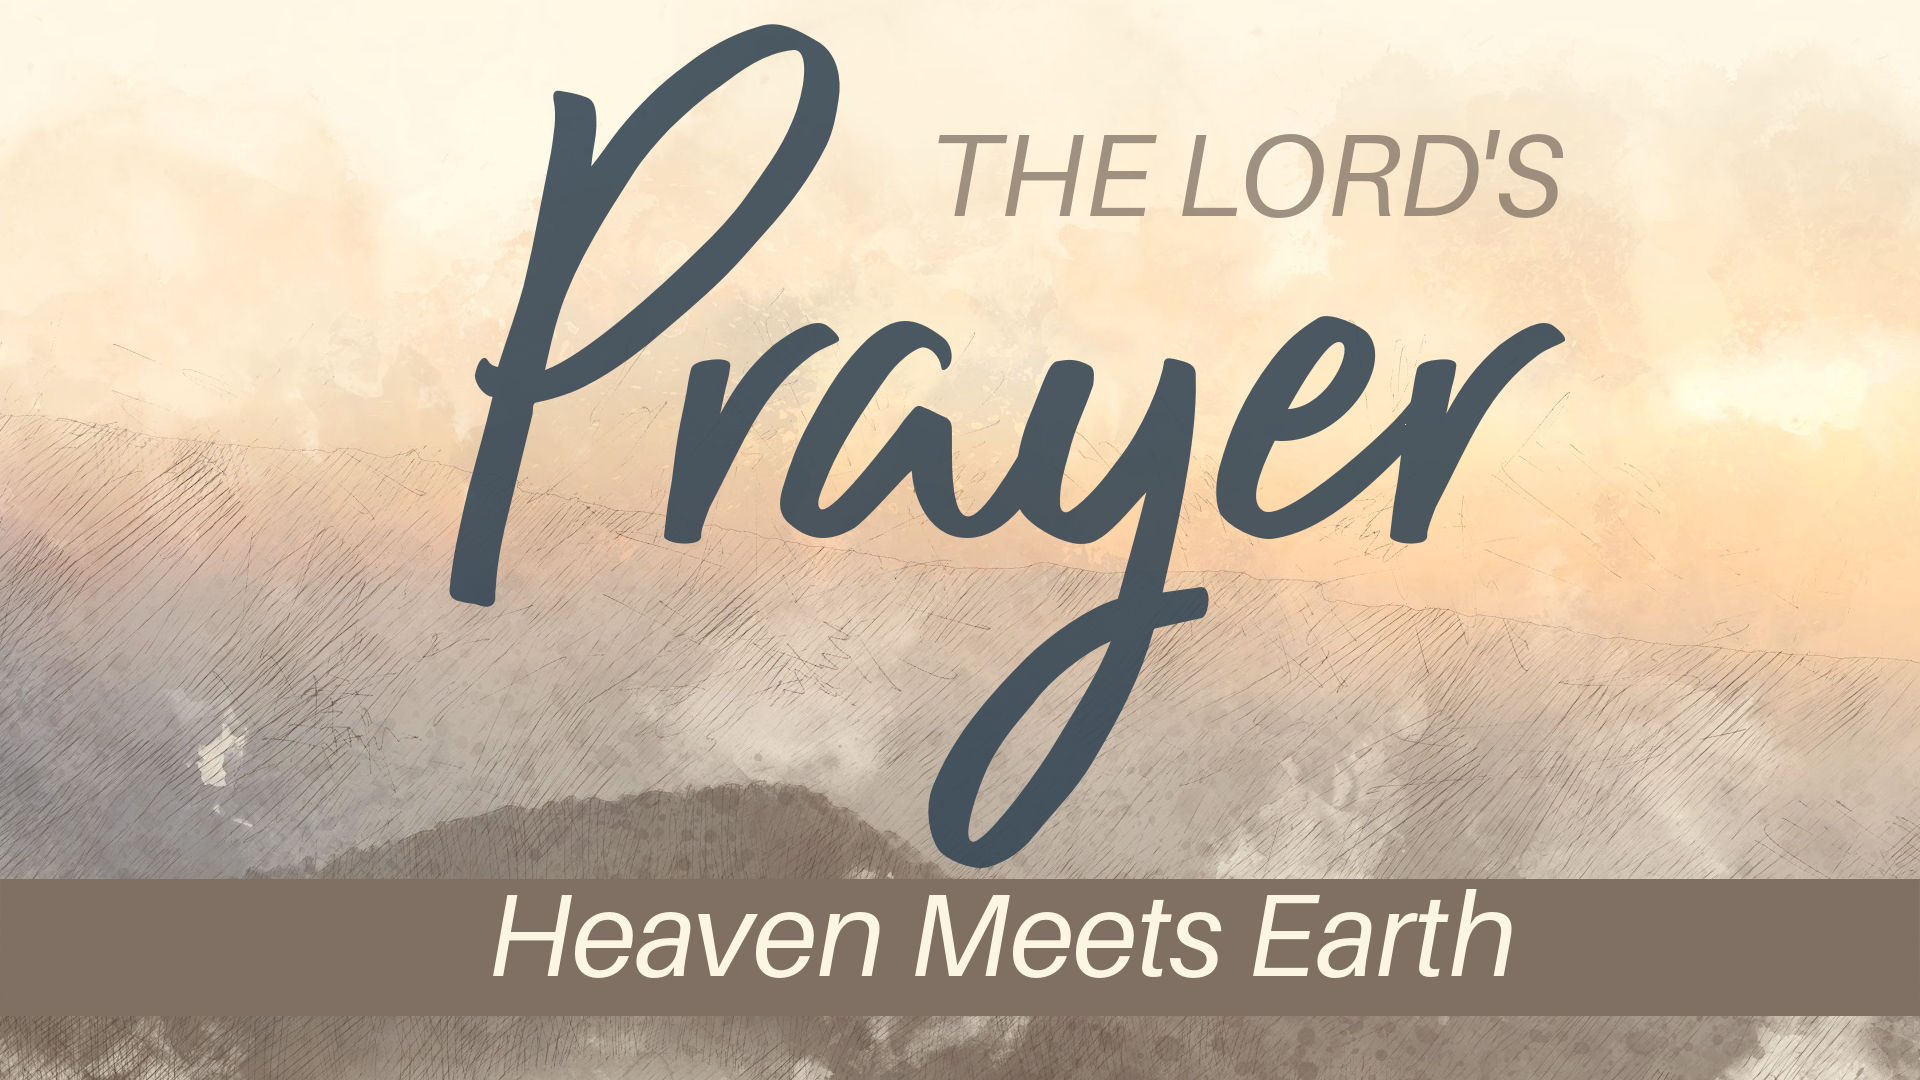 Walk slowly through the first part of the Lord's Prayer and discover the mystery, beauty, and depth of God's heart.